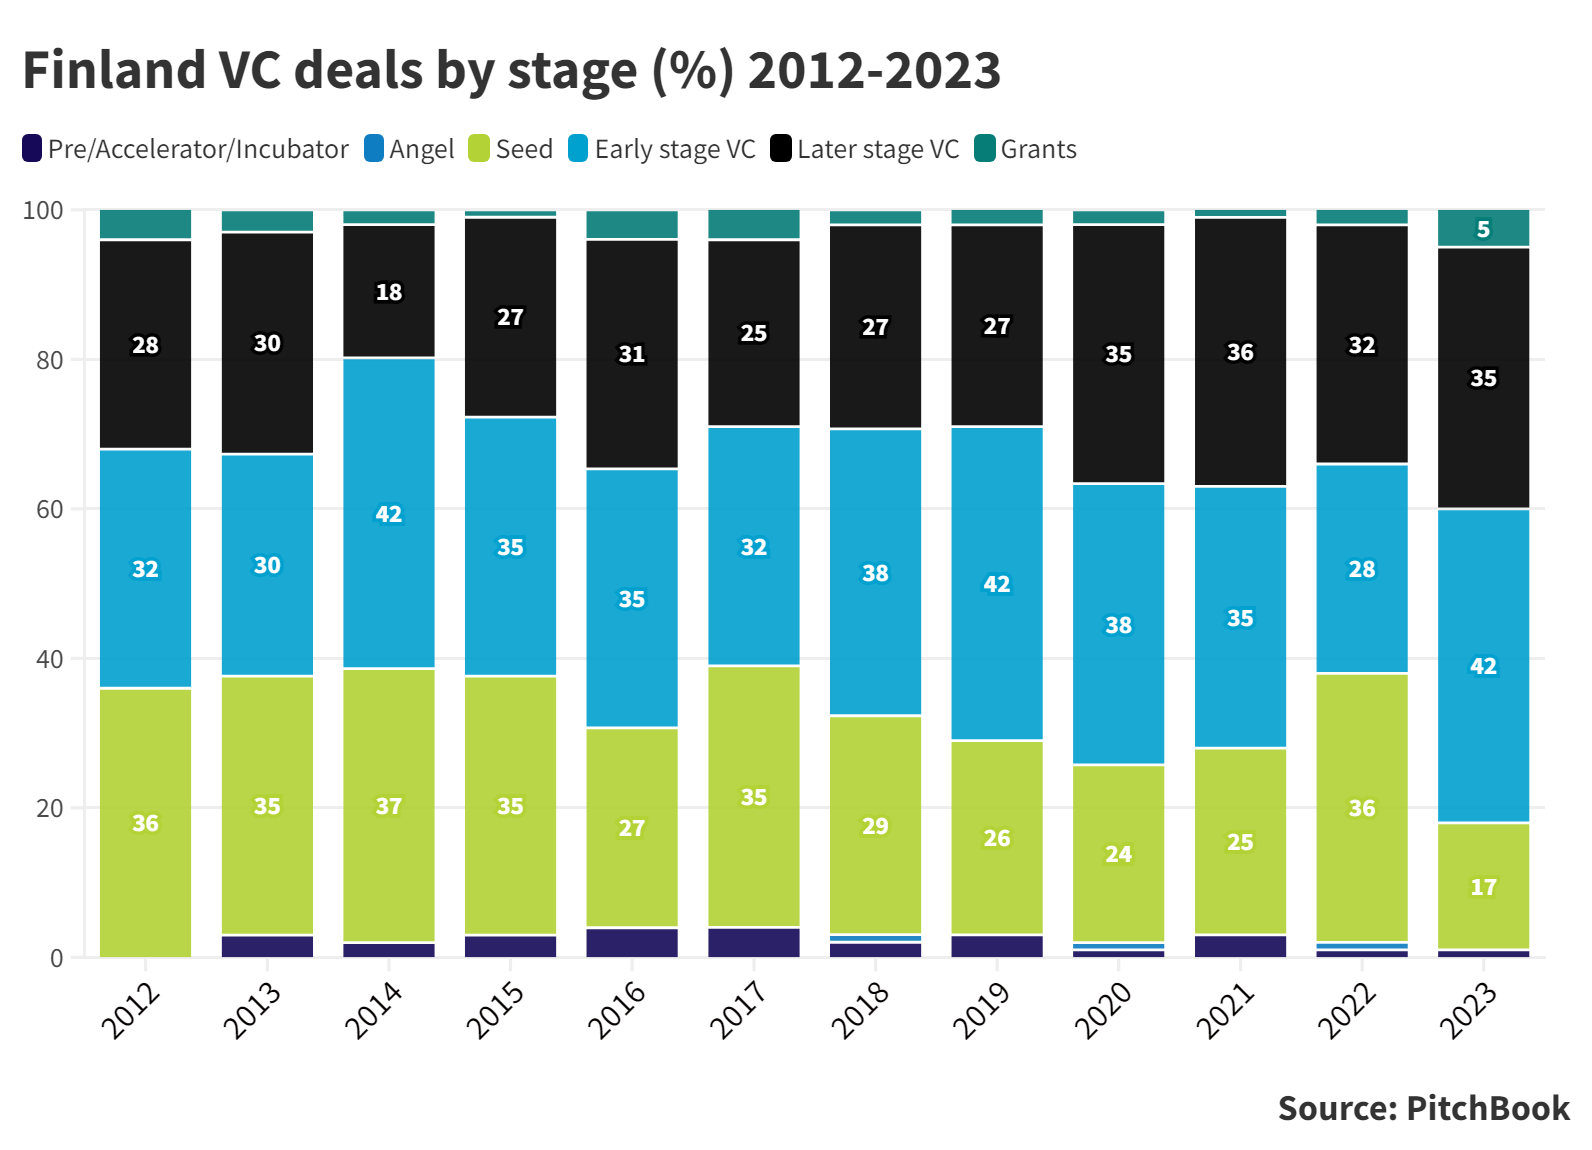 Stacked column chart showing Finland VC deals by stage in percentage (%). Source: PitchBook